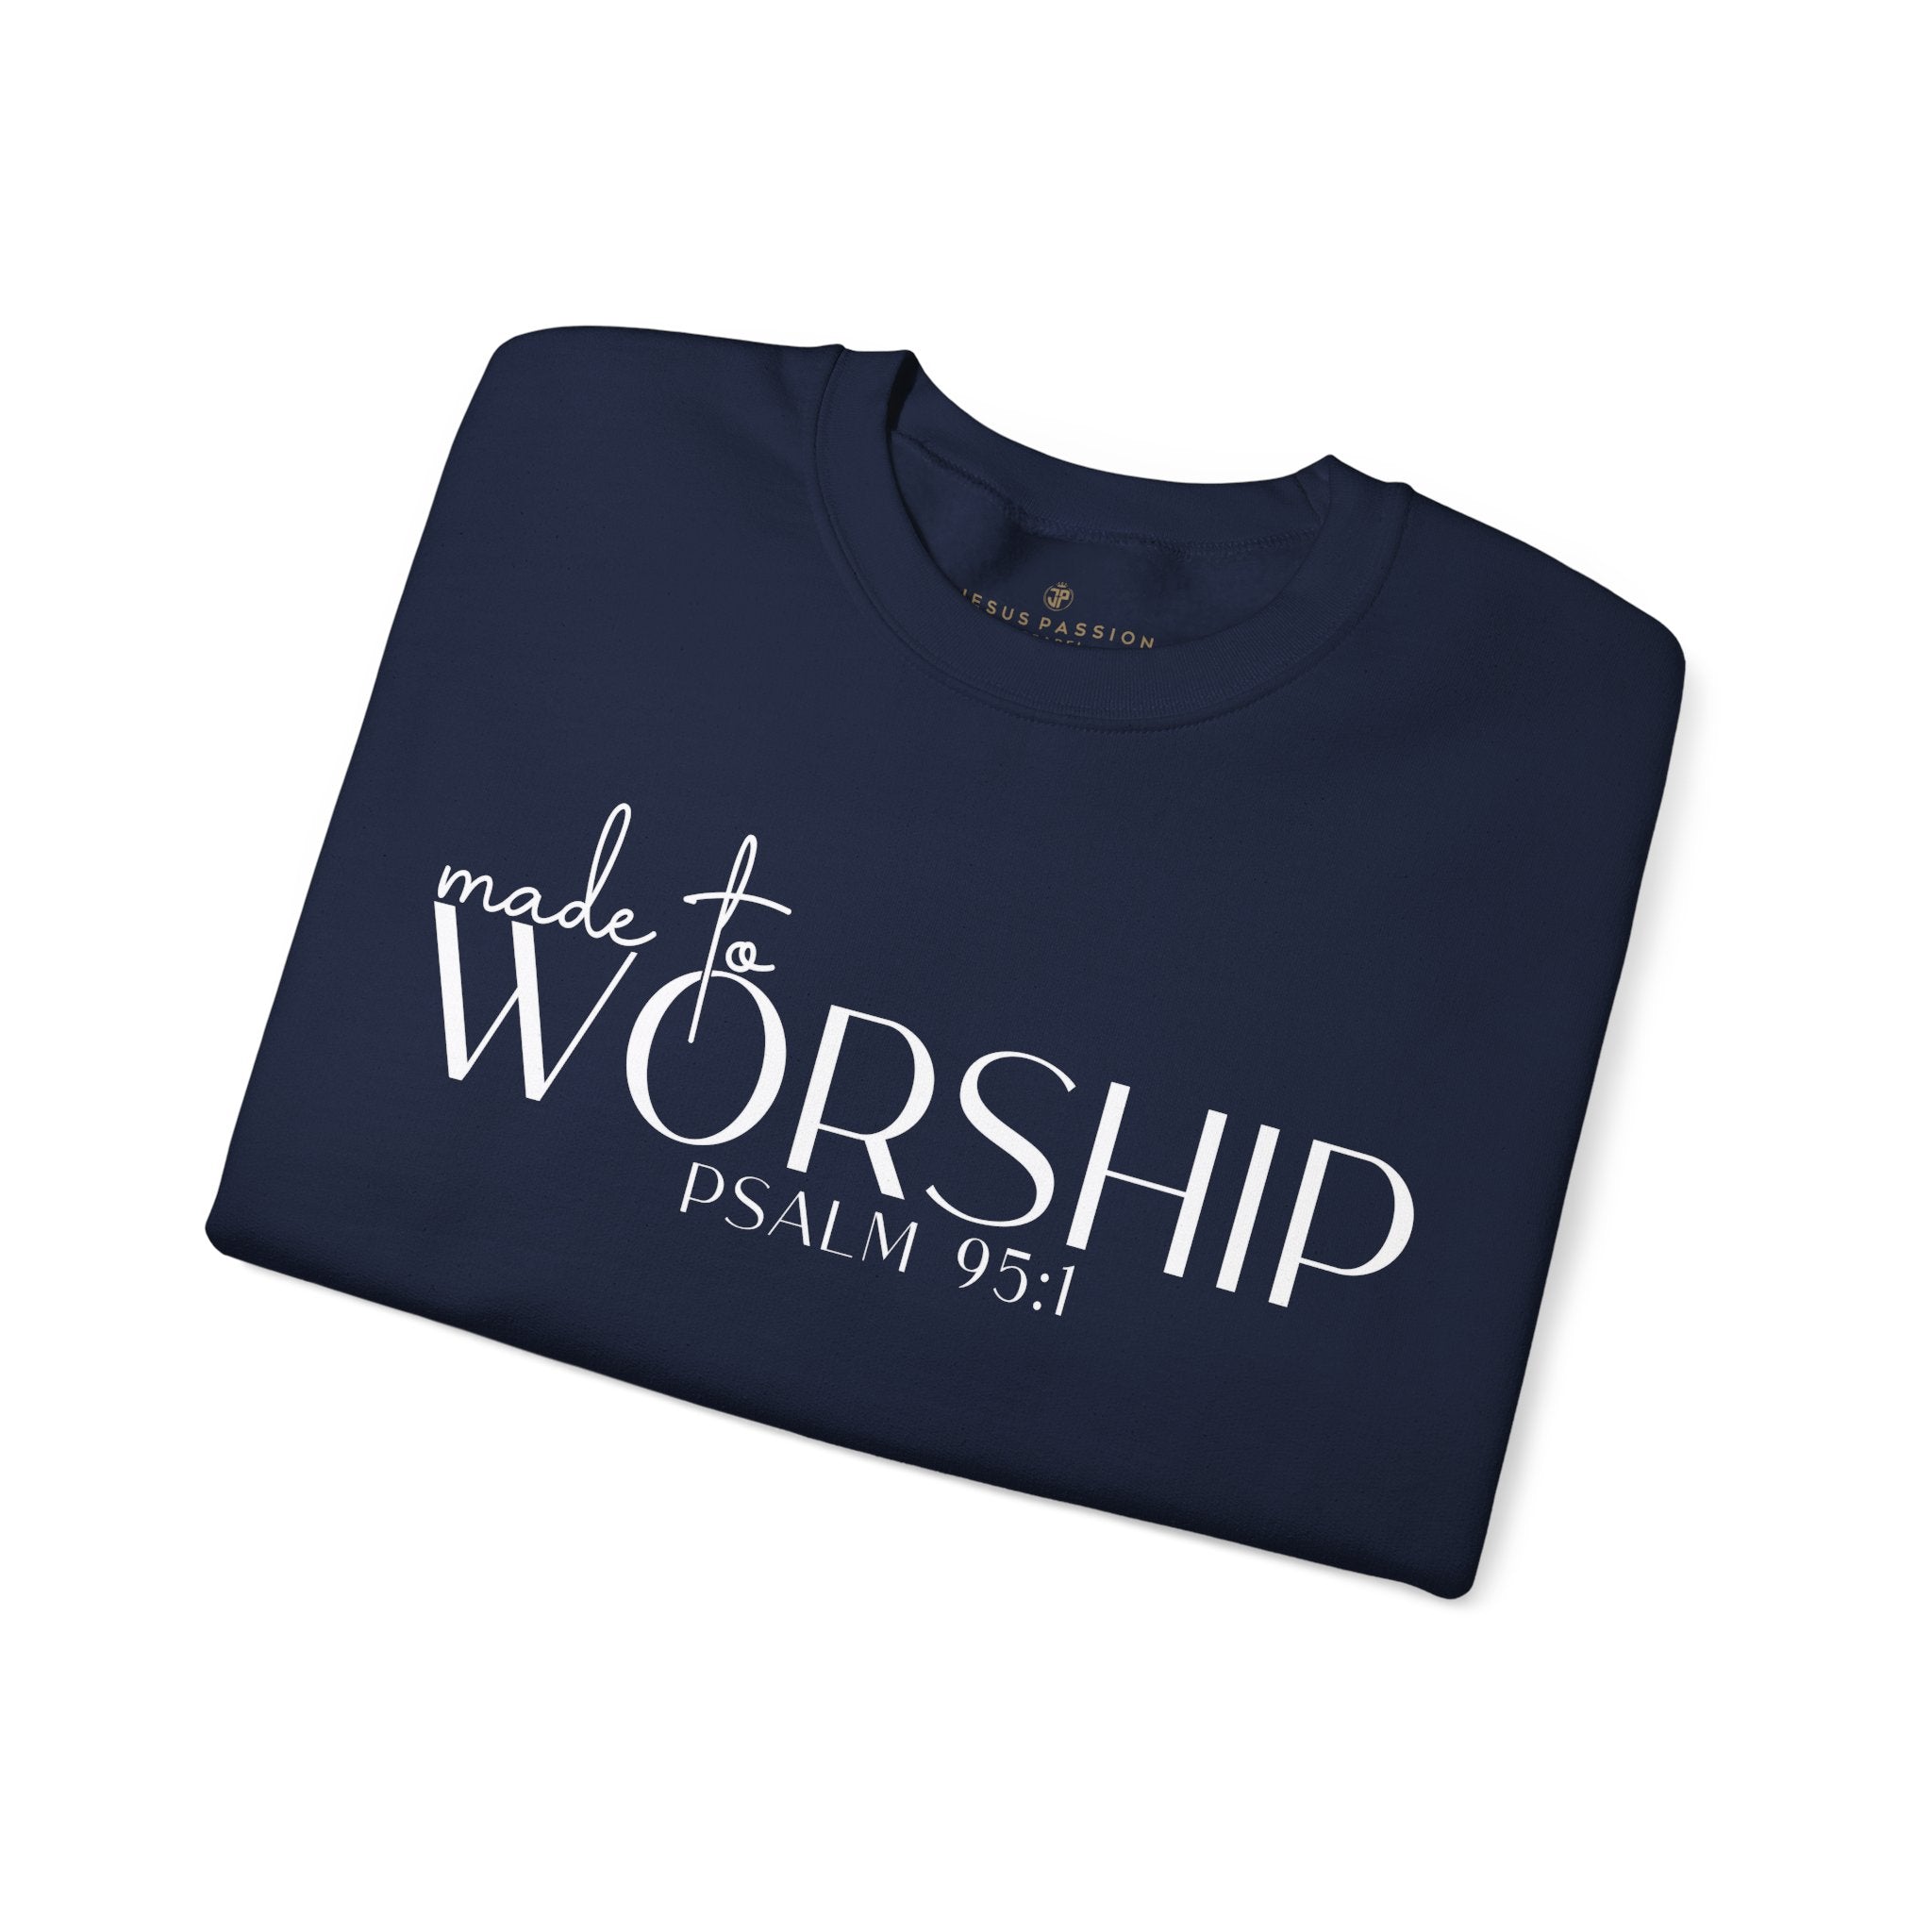 Made to Worship Women's Fleece Unisex-Fit Sweatshirt Navy / Pink Heliconia Size: S Color: Heliconia Jesus Passion Apparel